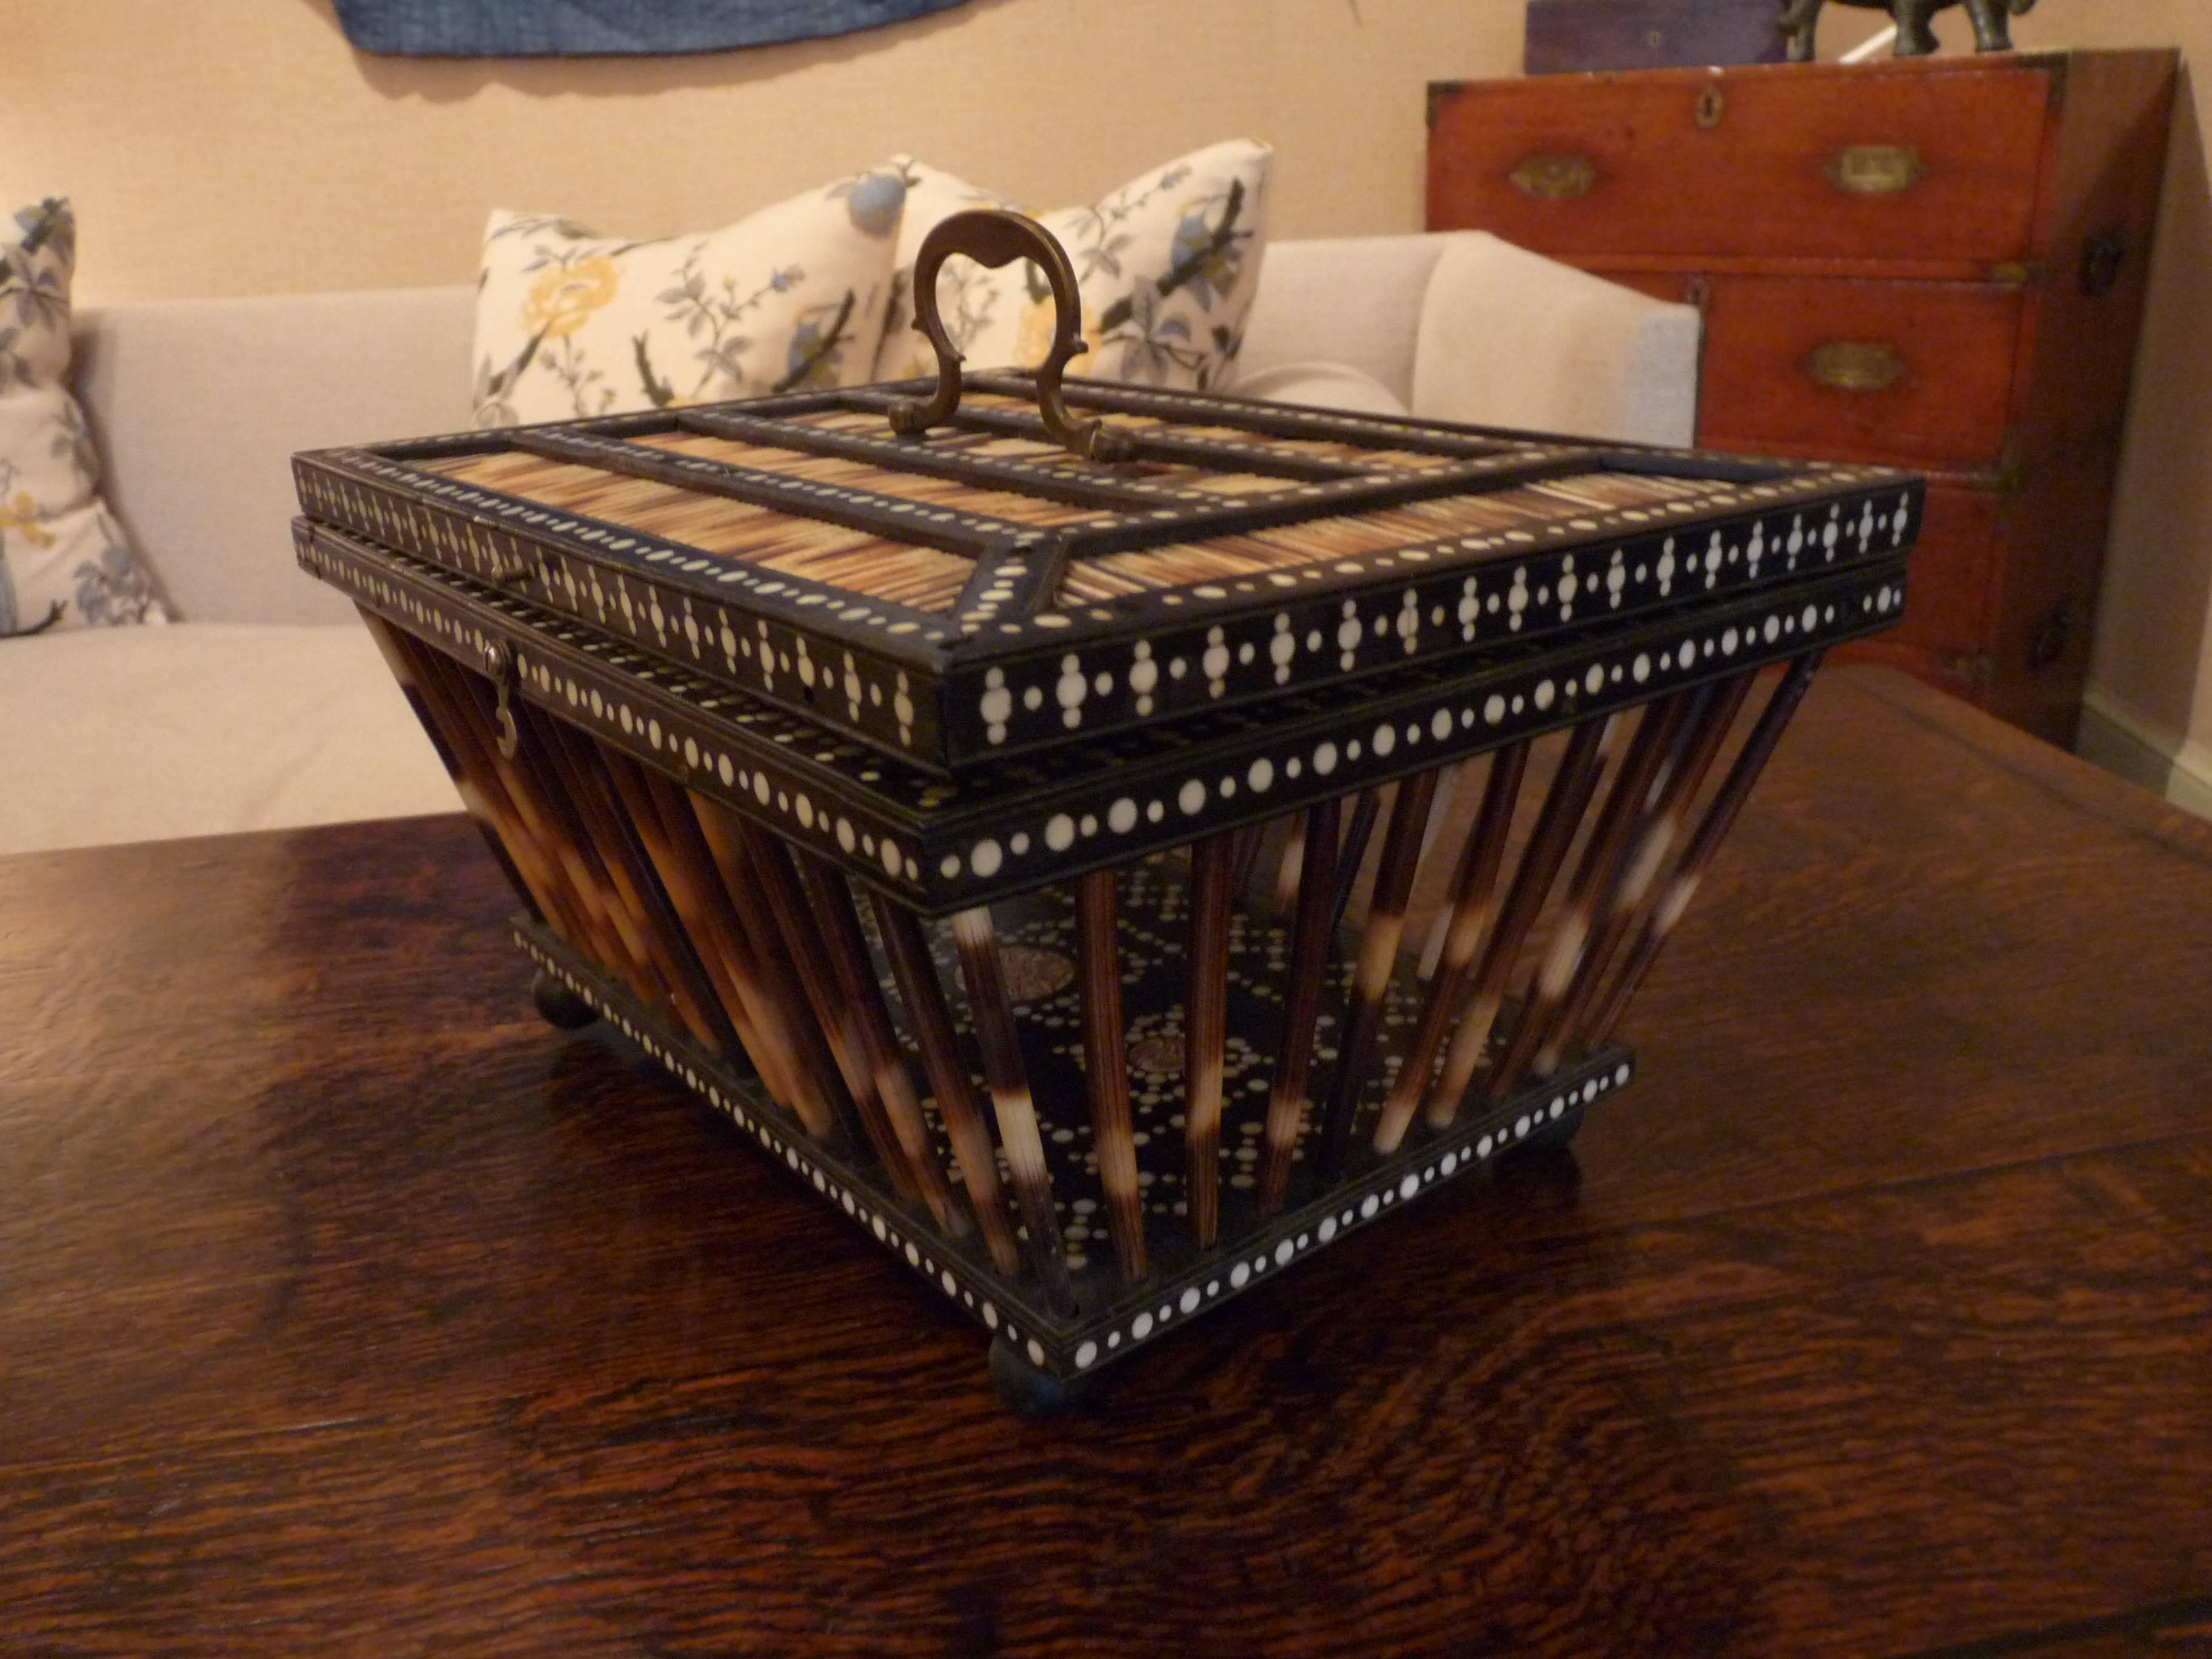 This basket box is an impeccable example of Indian porcupine quill basket and box craftsmanship and is one of the nicest we've had.  It is in fantastic condition and has brass hardware. 